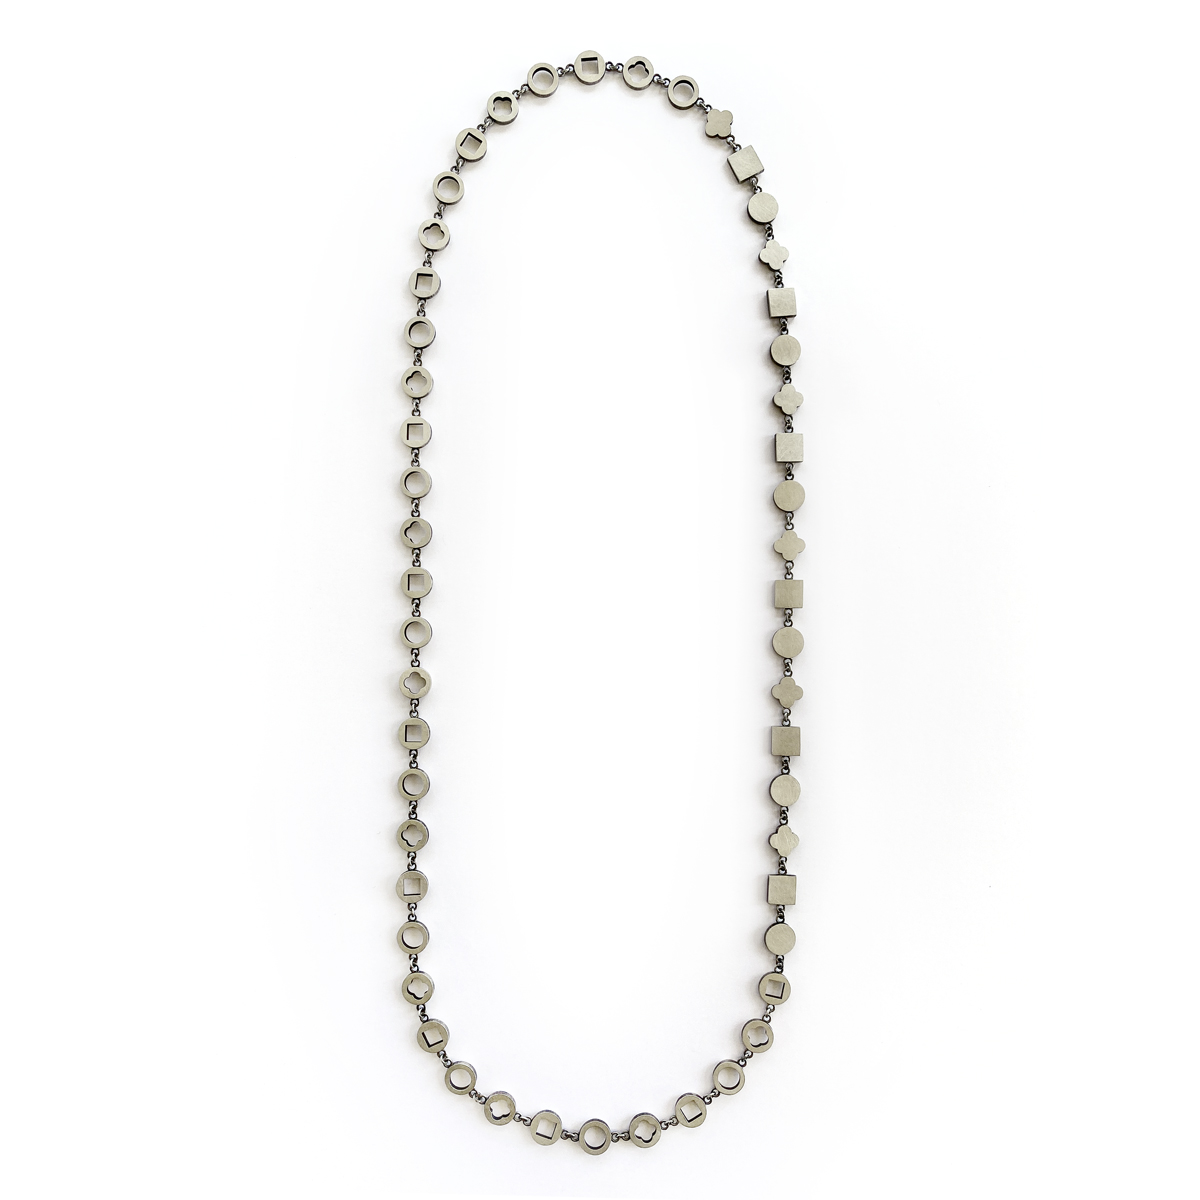 Reverence Necklace (variation 1), sterling silver, 2020, Kate Alterio